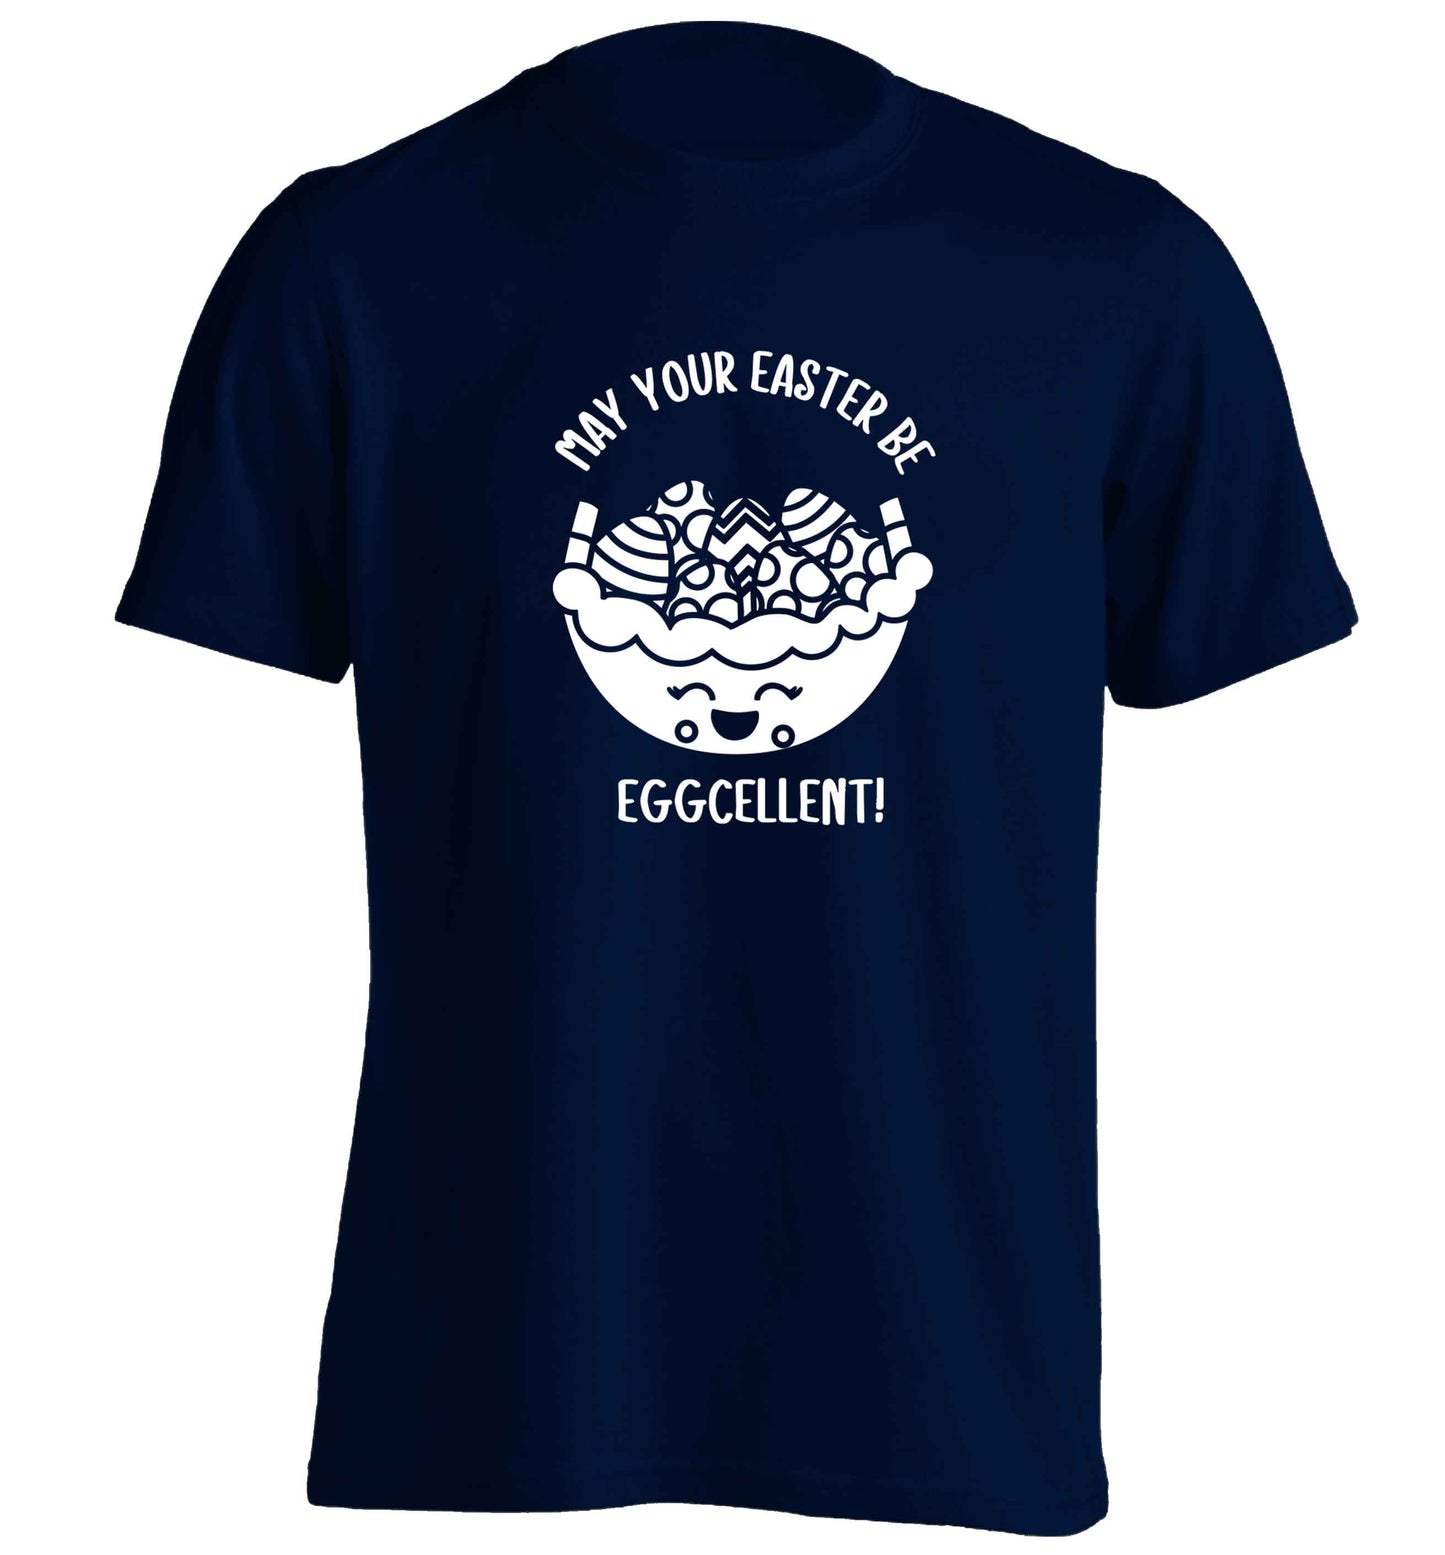 May your Easter be eggcellent adults unisex navy Tshirt 2XL